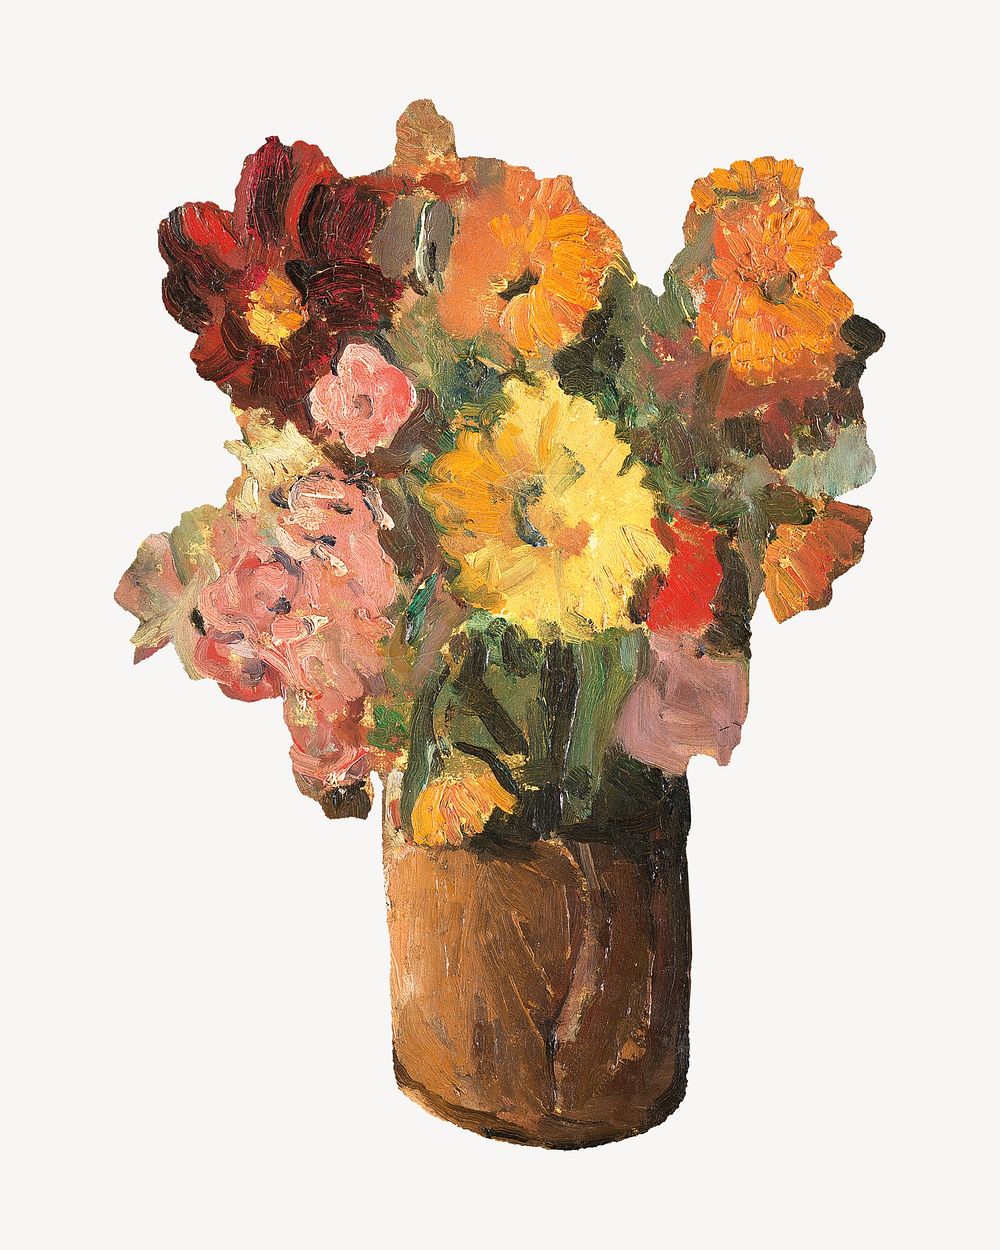 Flower vase still life, vintage illustration by Roger Fry. Remixed by rawpixel.